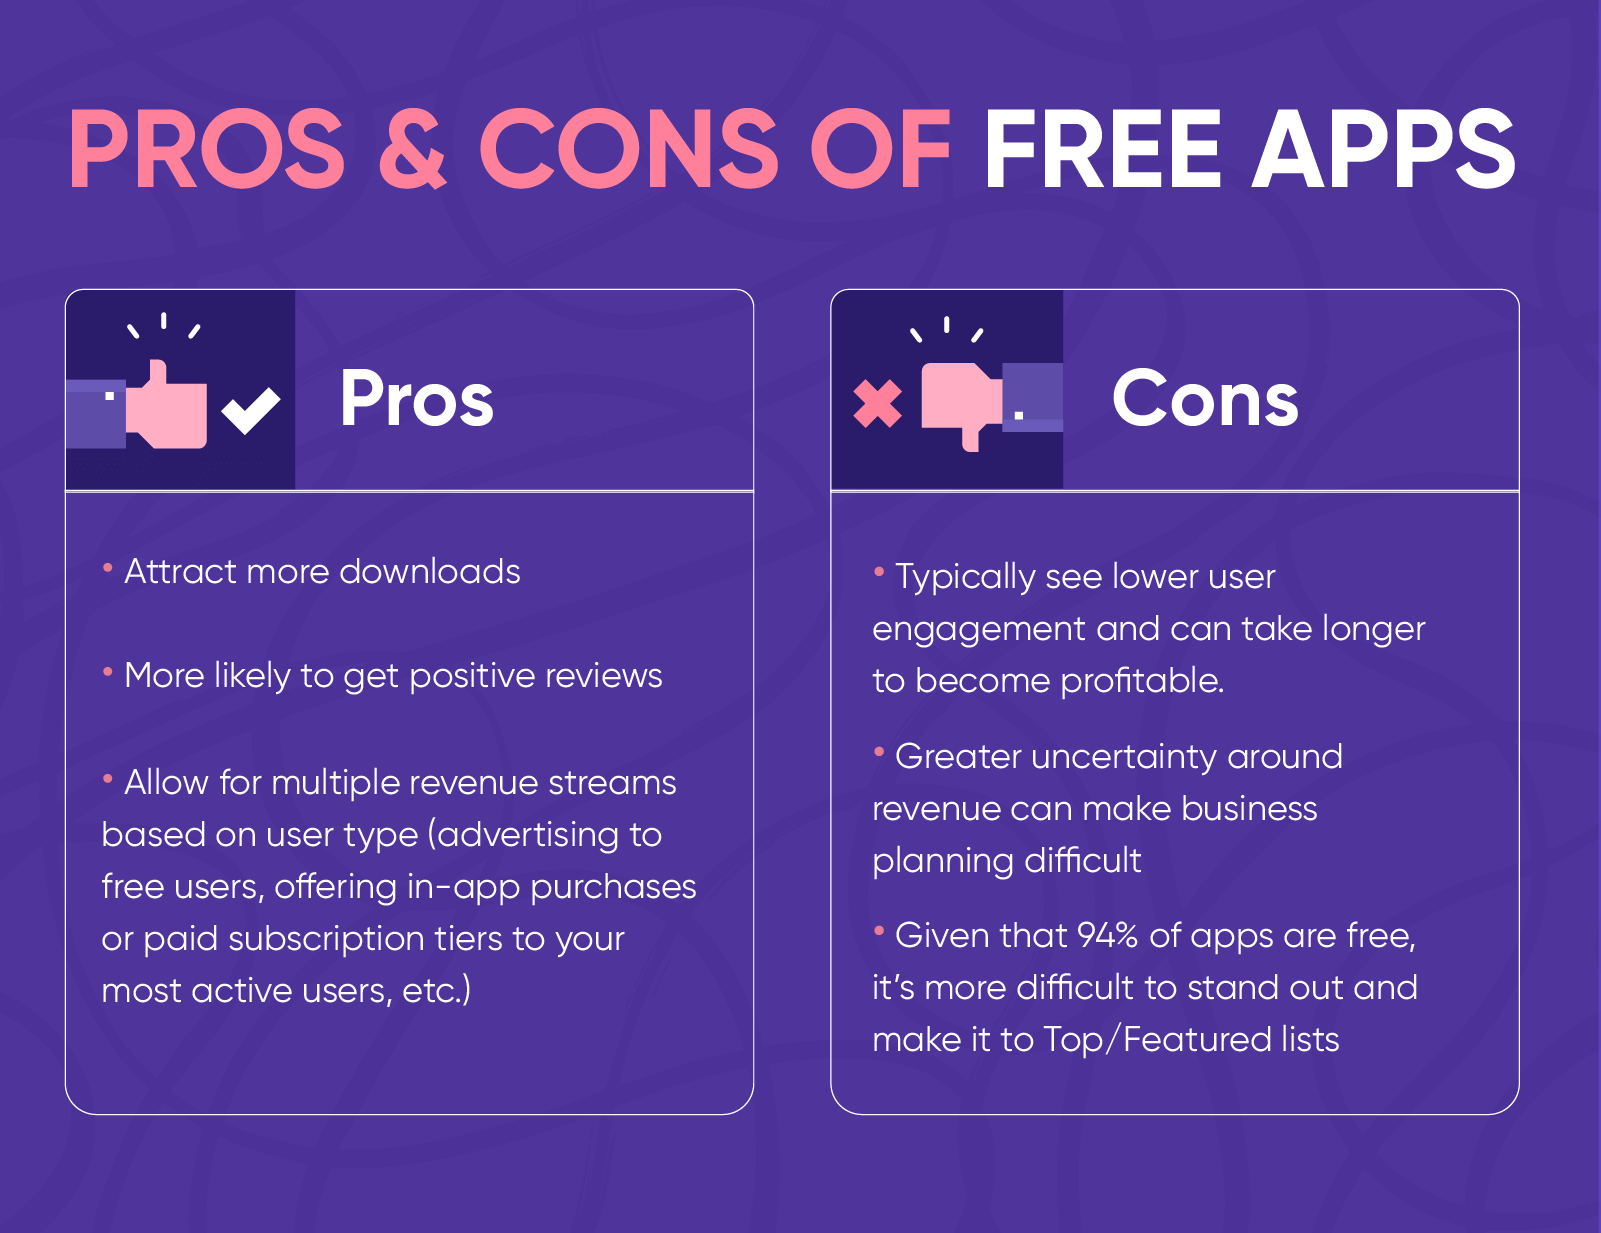 Pros and Cons of Free apps